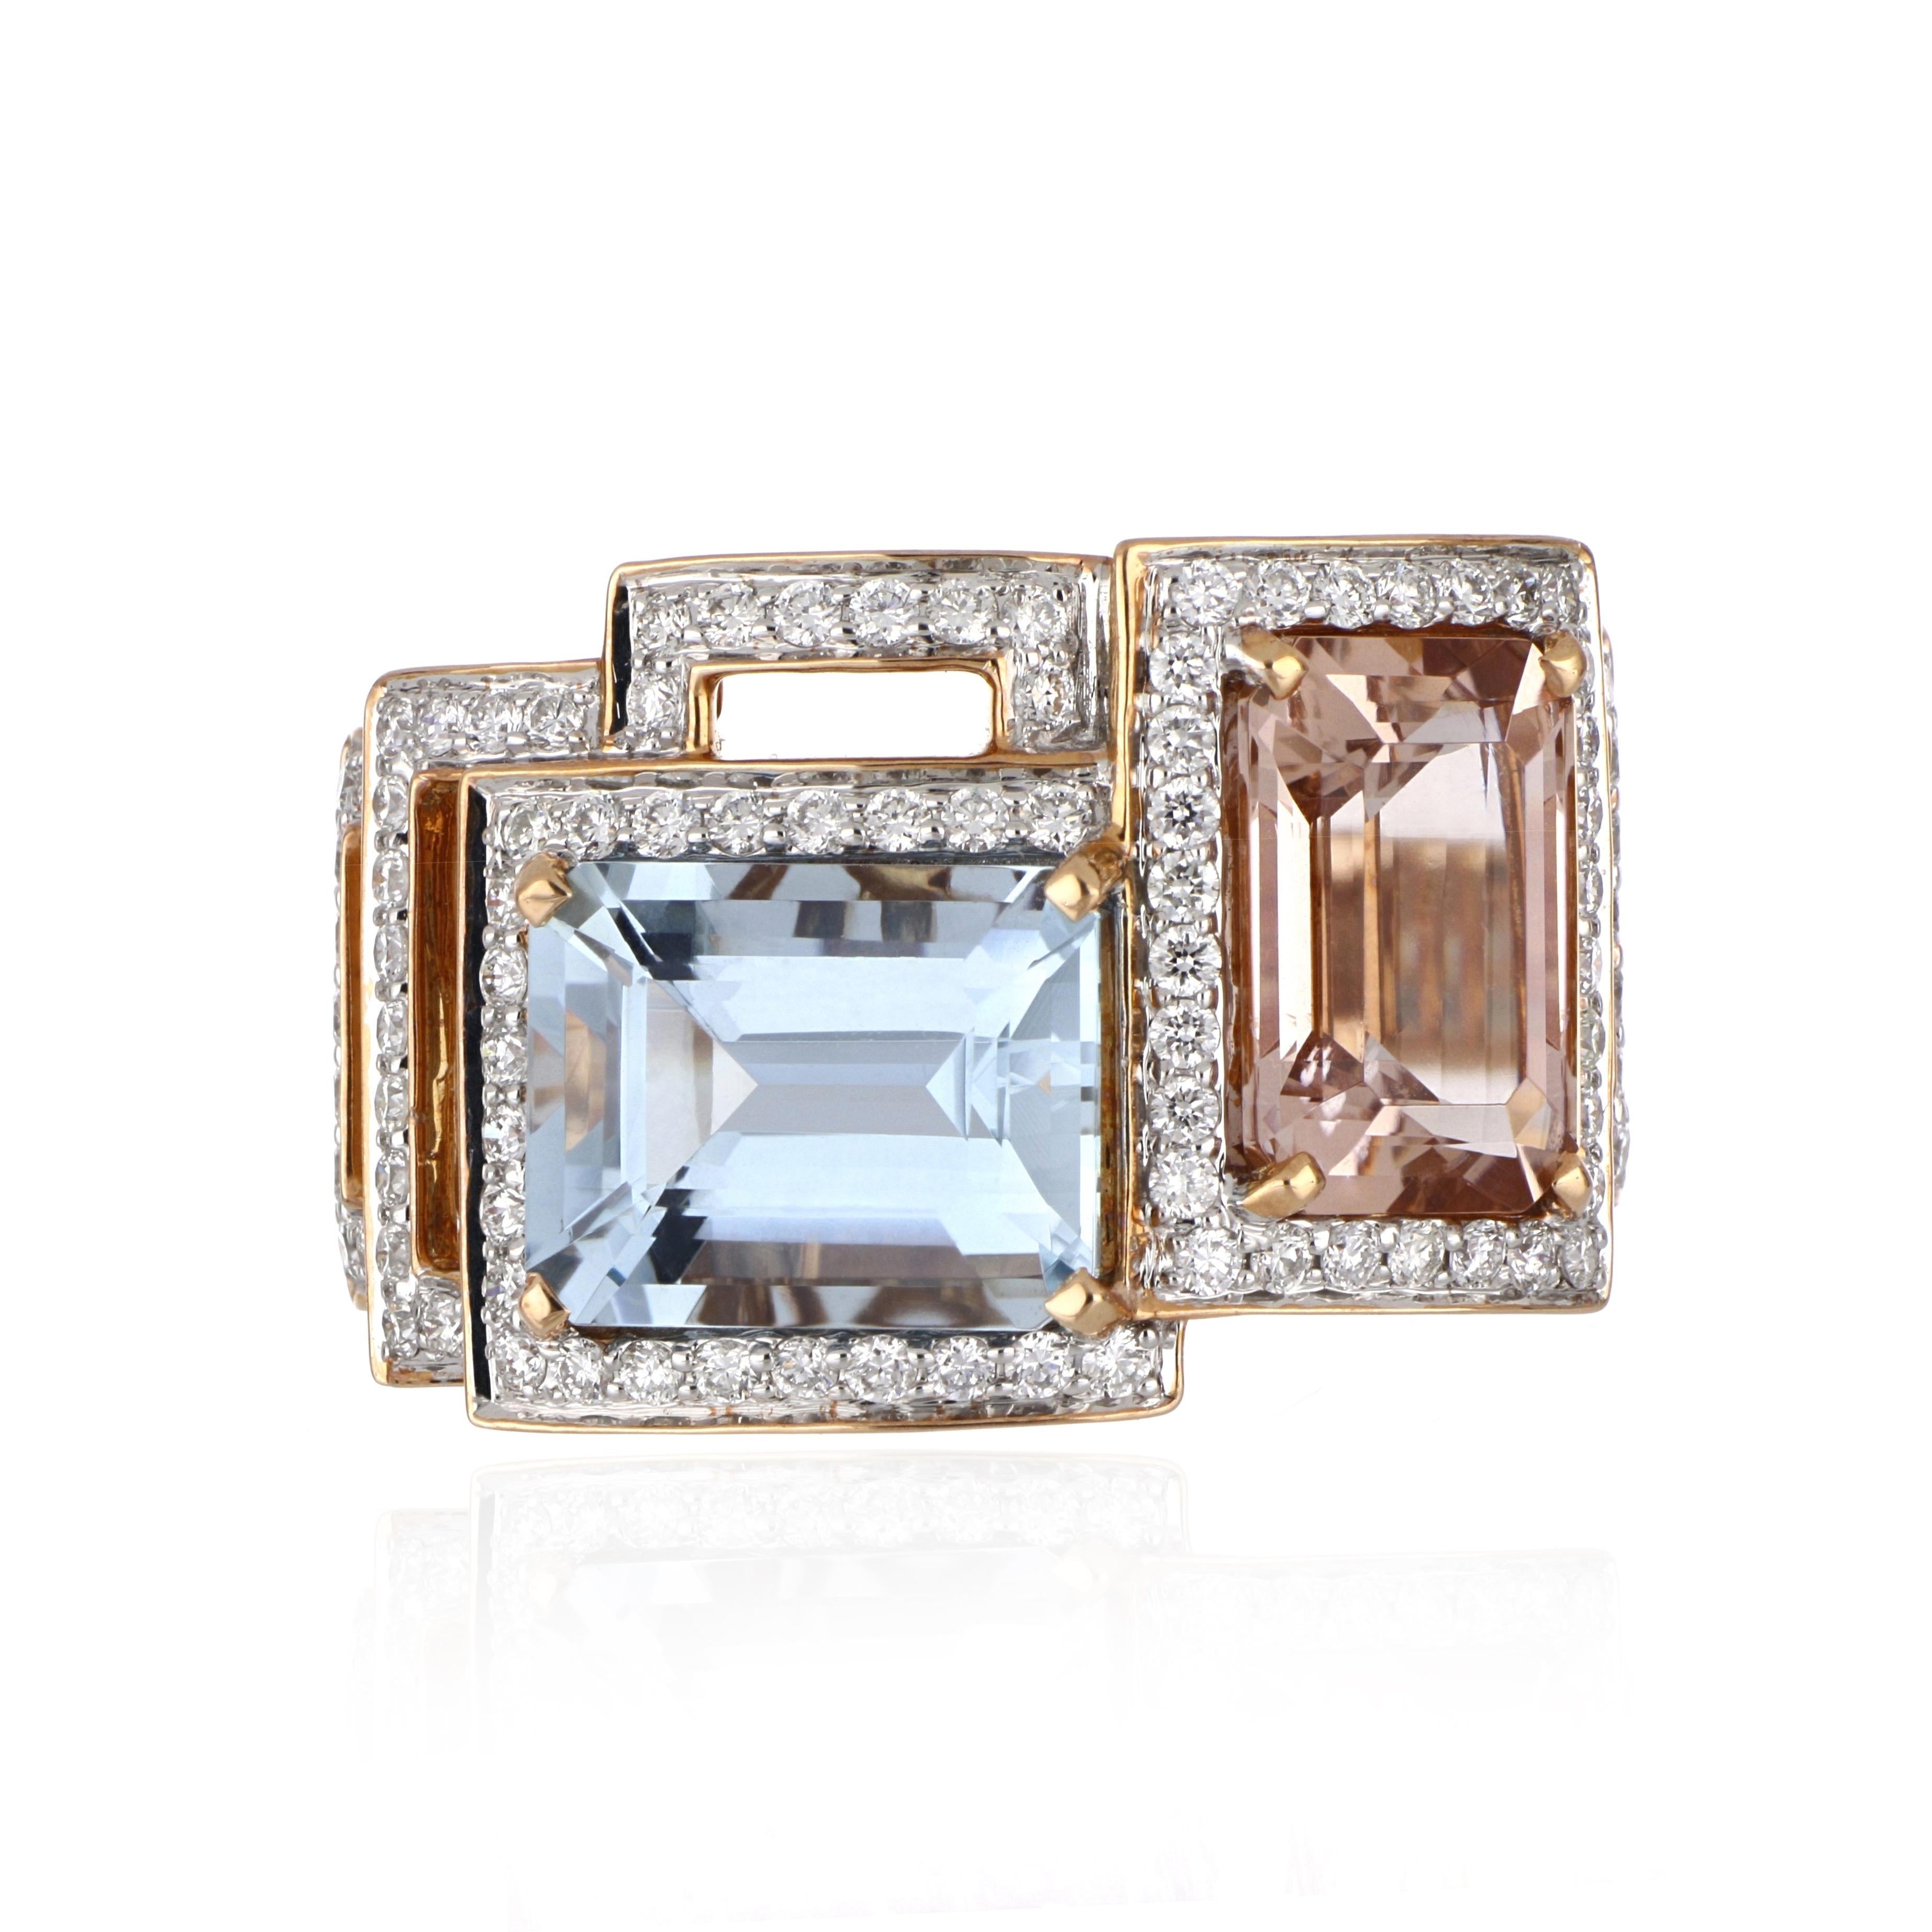 Elegant and exquisitely detailed Geometrical Cocktail 18K Ring, centre set with 2.37 Ct Octagon Morganite and 3.03 Ct Octagon Aquamarine, surrounded by and enhanced on shank with micro pave Diamonds, weighing approx. 0.69 total carat weight.